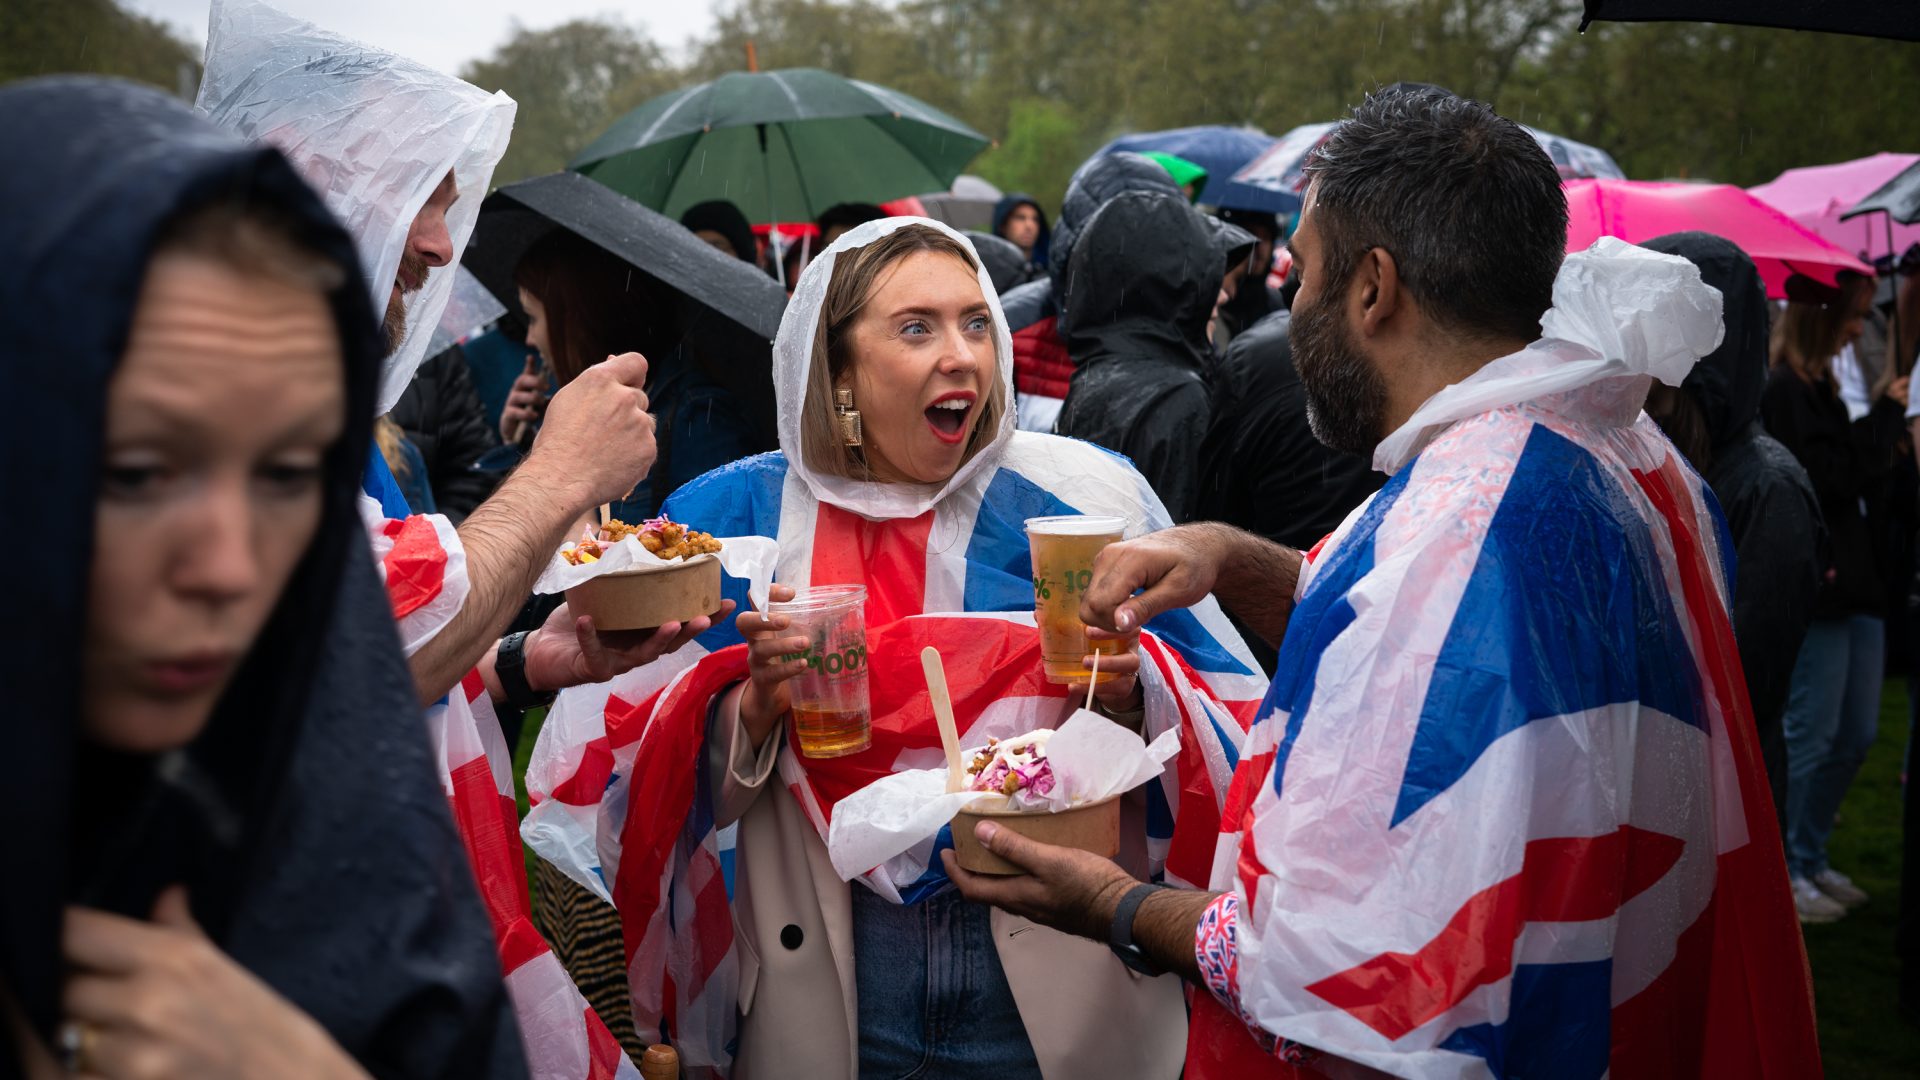 Three friends in Union Jack capes enjoy a beer and some food during the event.